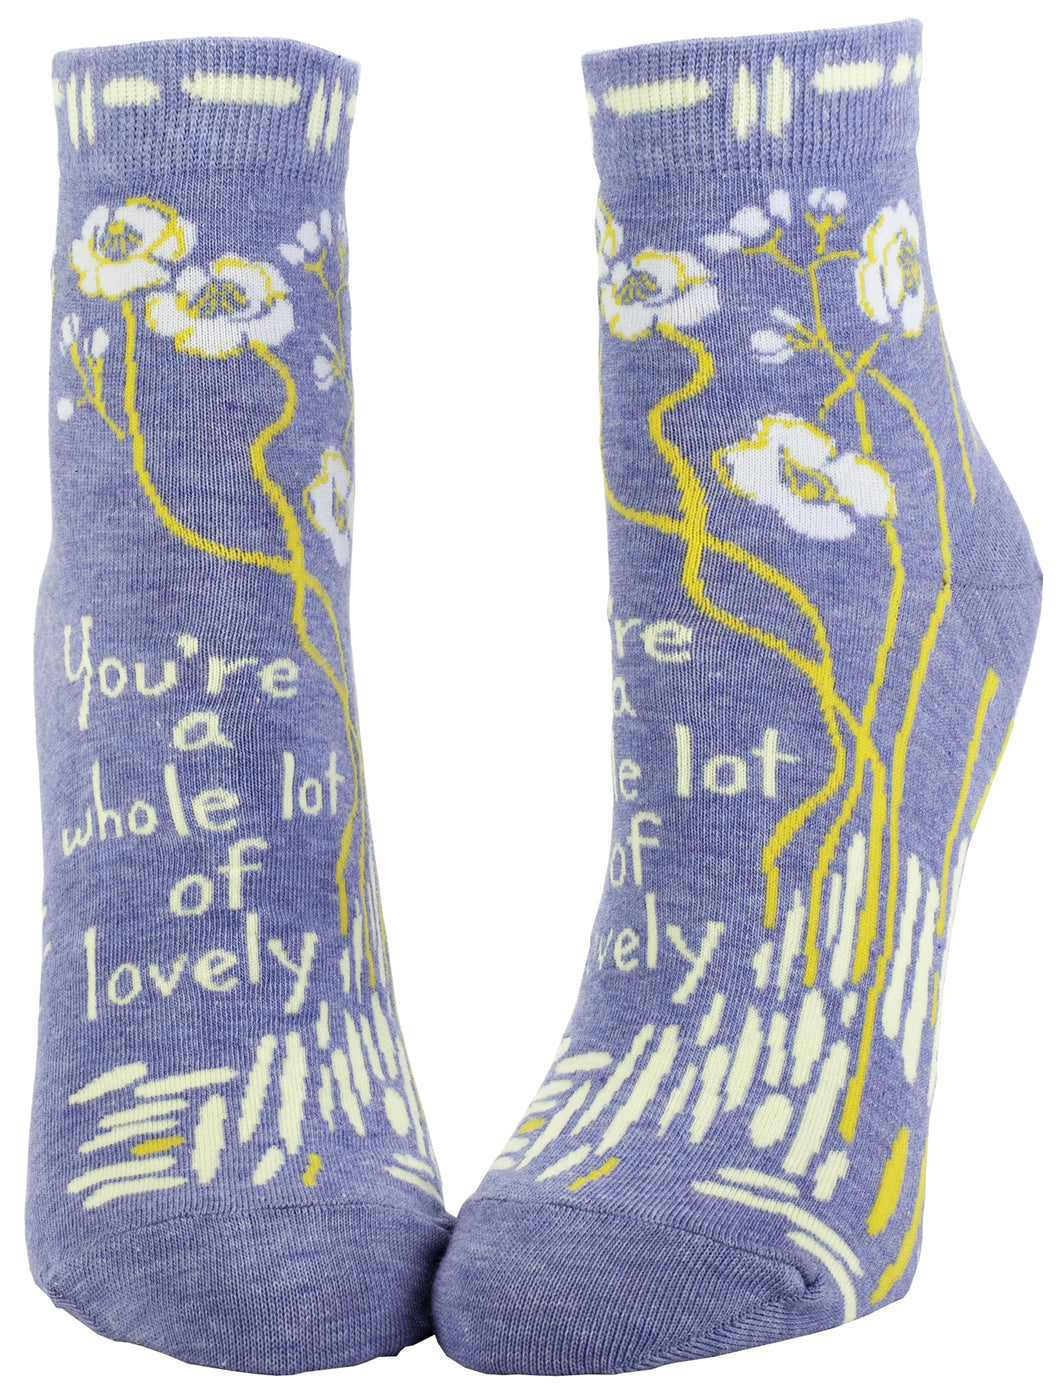 You're A Whole Lot of Lovely - Women's Ankle Socks